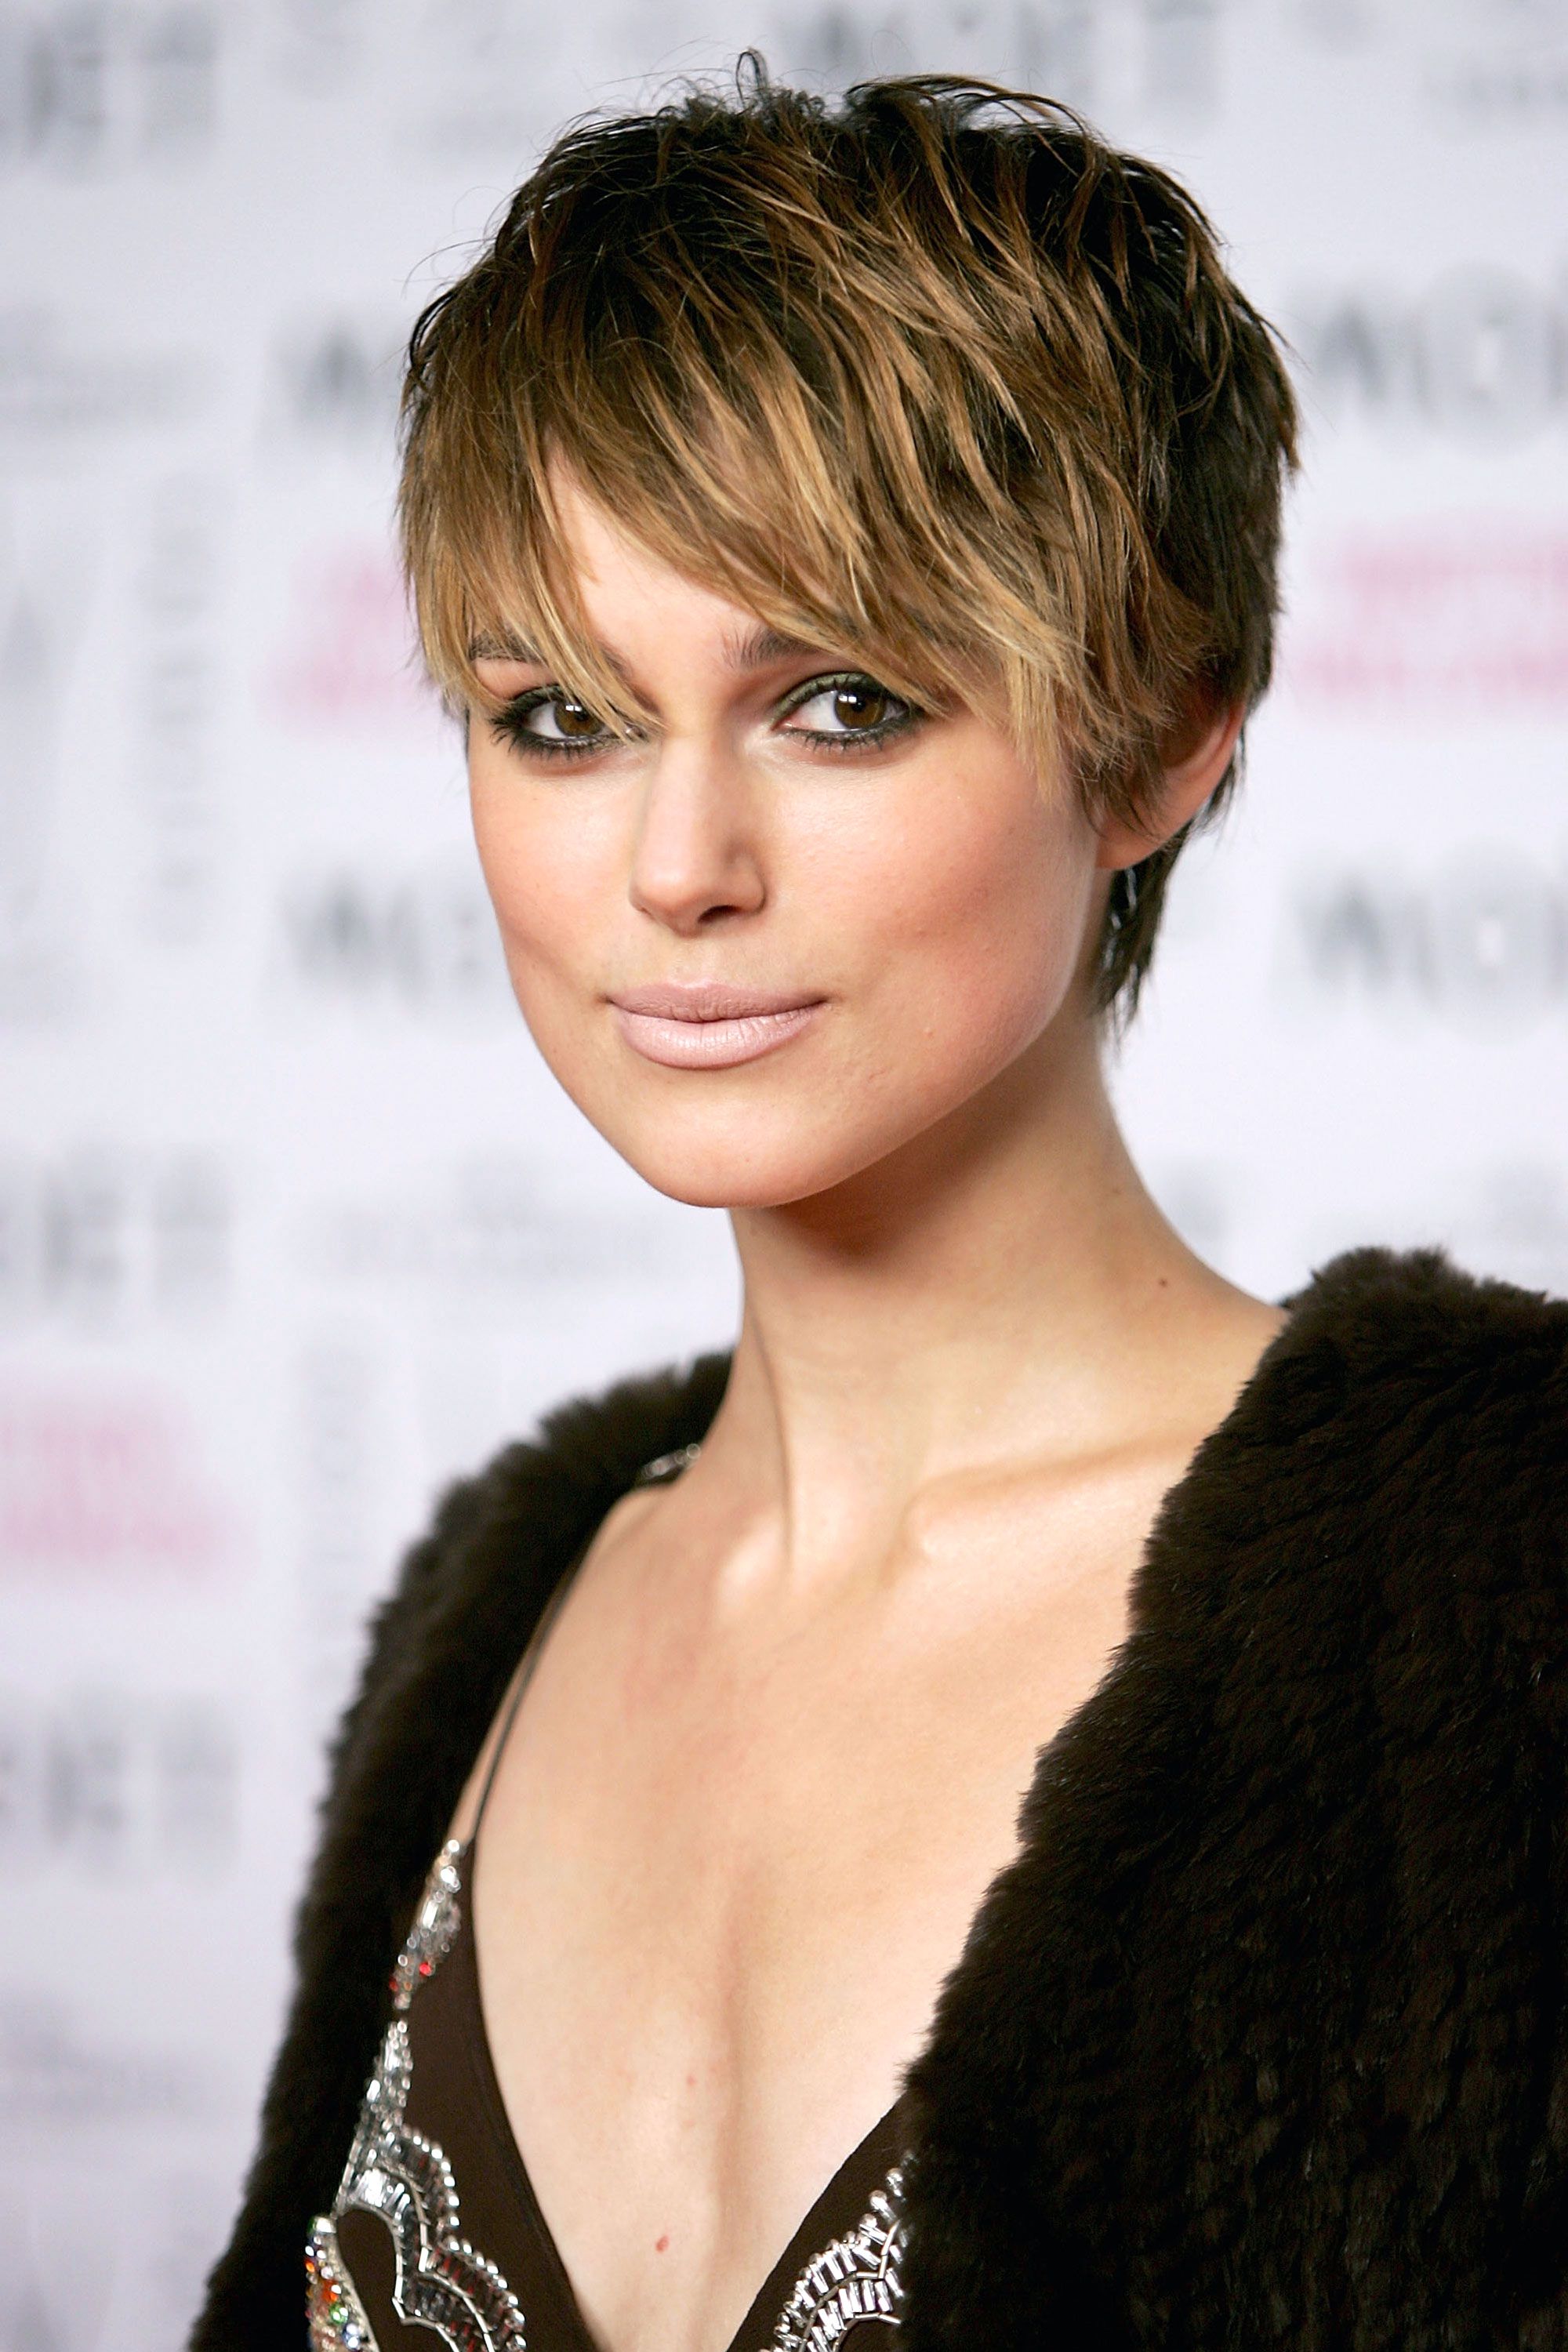 50+ Pixie Cuts We Love for 2019 - Short Pixie Hairstyles from